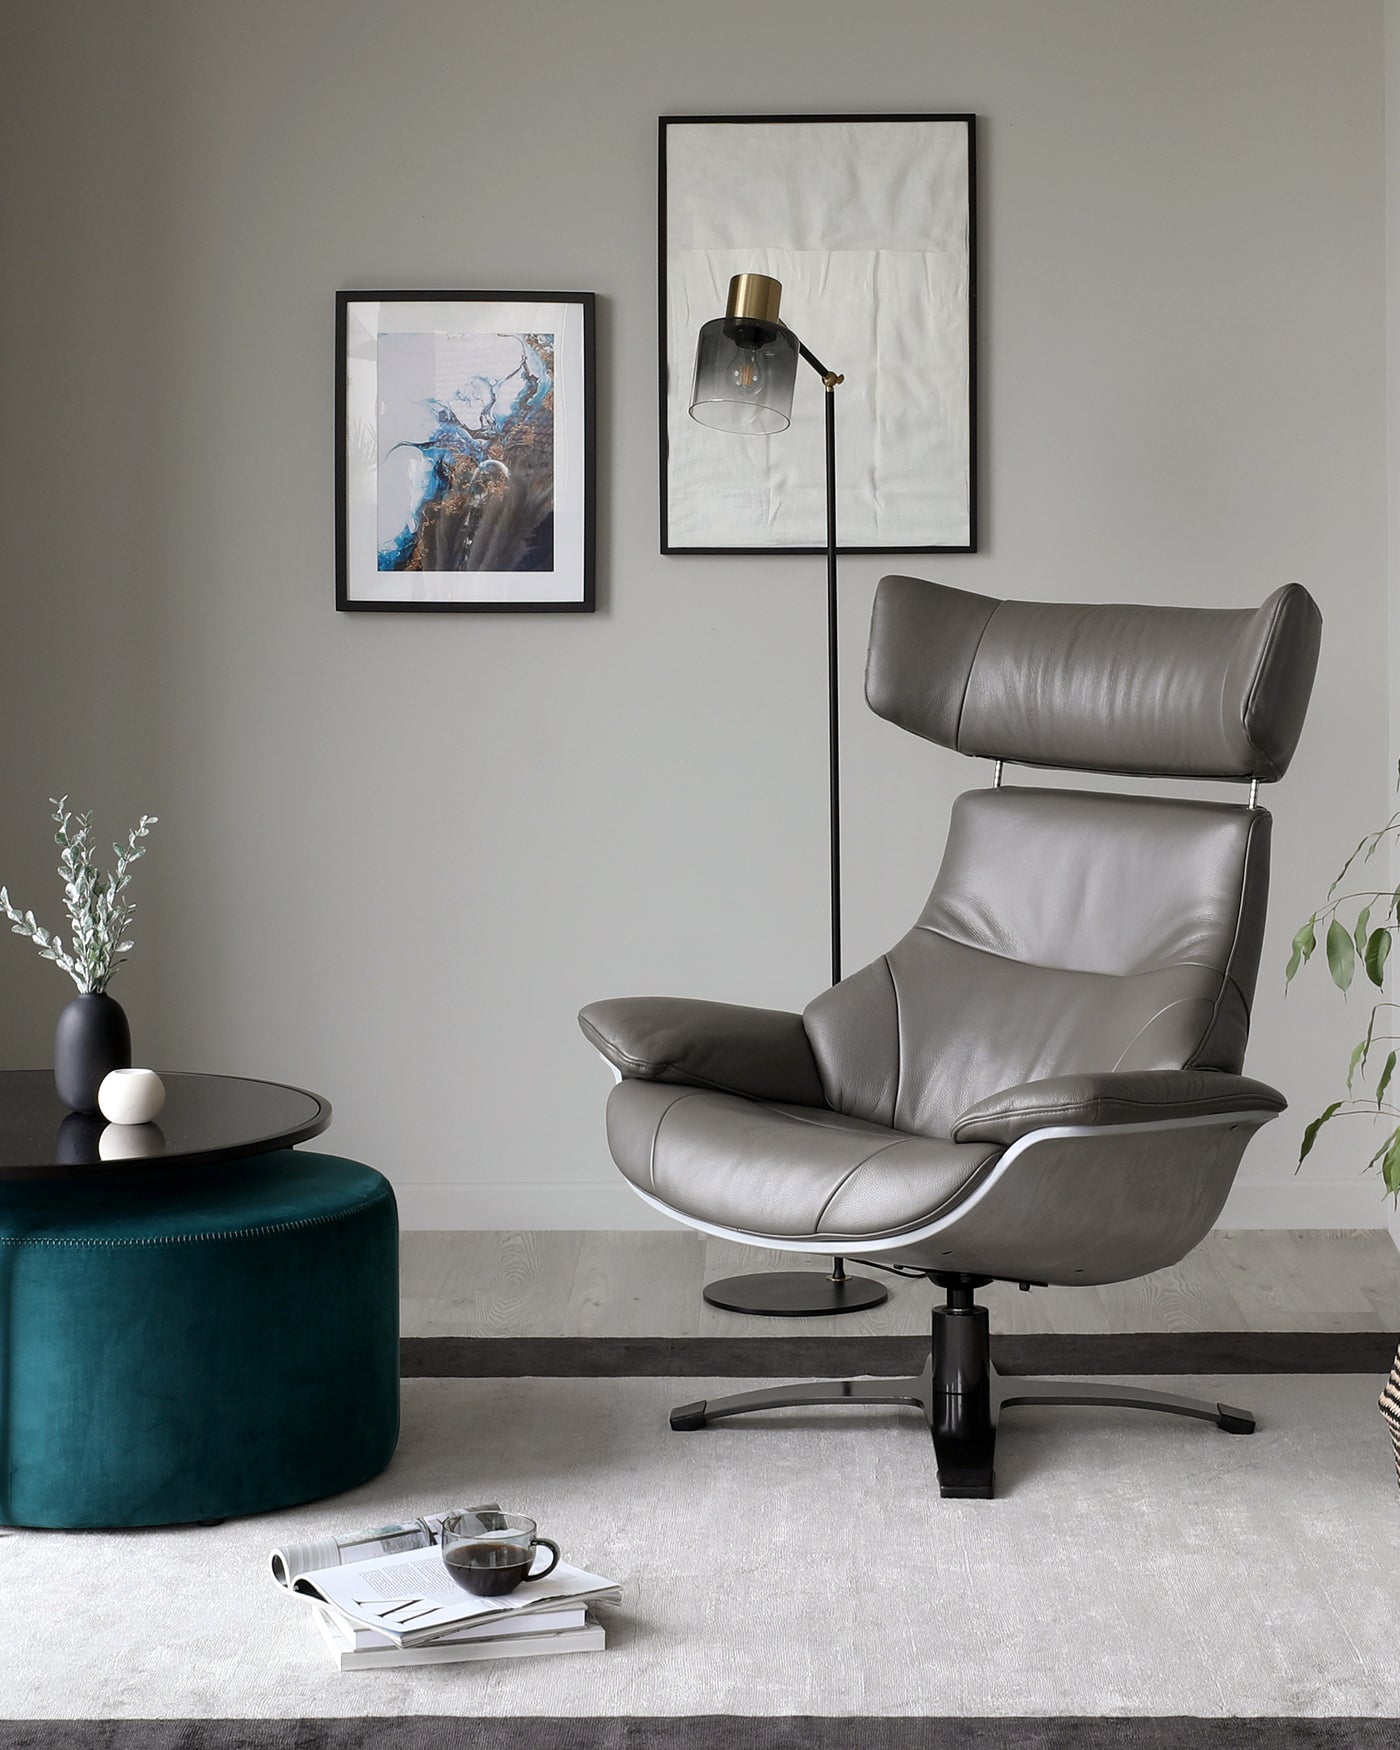 A modern, minimalist room featuring a luxurious grey leather recliner chair with a wide seat, high back, and sleek metal base. In front of it is a round, black coffee table on a textured area rug. To the side is a vibrant teal pouffe, and a tall floor lamp with a bell-shaped glass shade and brass accents casts warm light into the space.